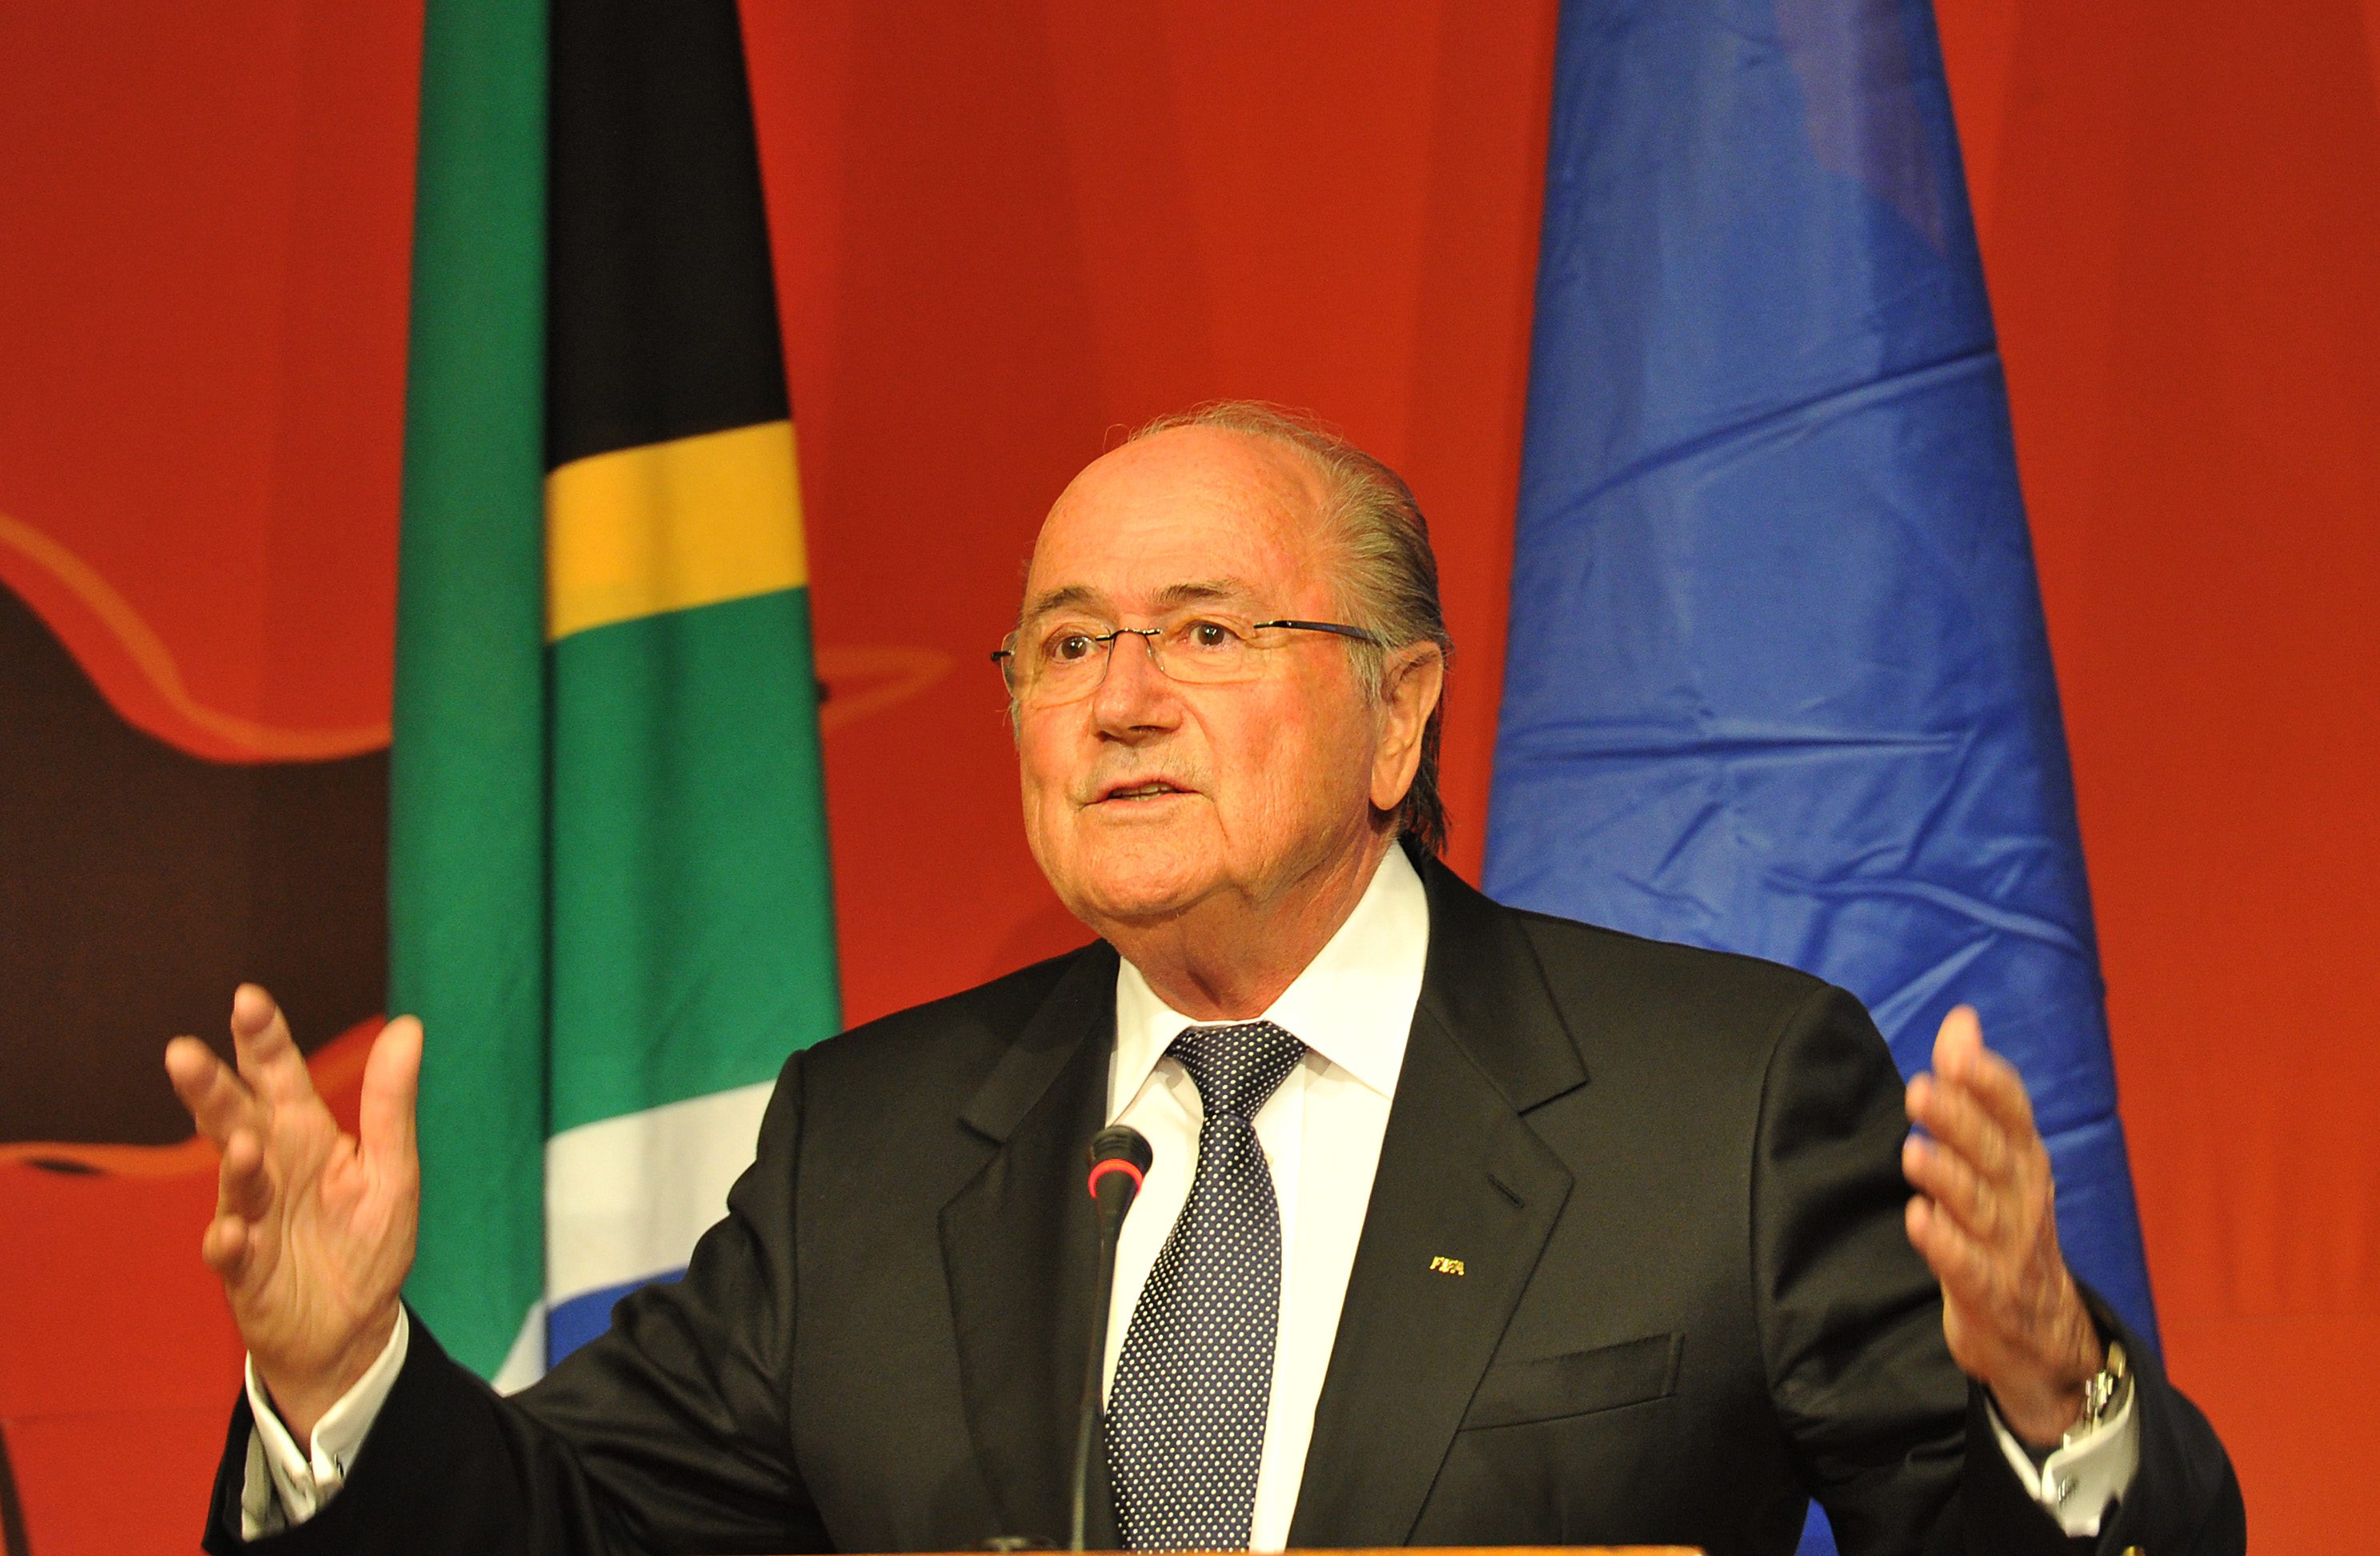 SOWETO, SOUTH AFRICA - DECEMBER 13:  FIFA President Sepp Blatter gives a speech during a media briefing at Soccer City on December 13, 2010 in Soweto, South Africa. The event was held to reflect on the legacy of the 2010 FIFA World Cup. (Photo by Gallo Im